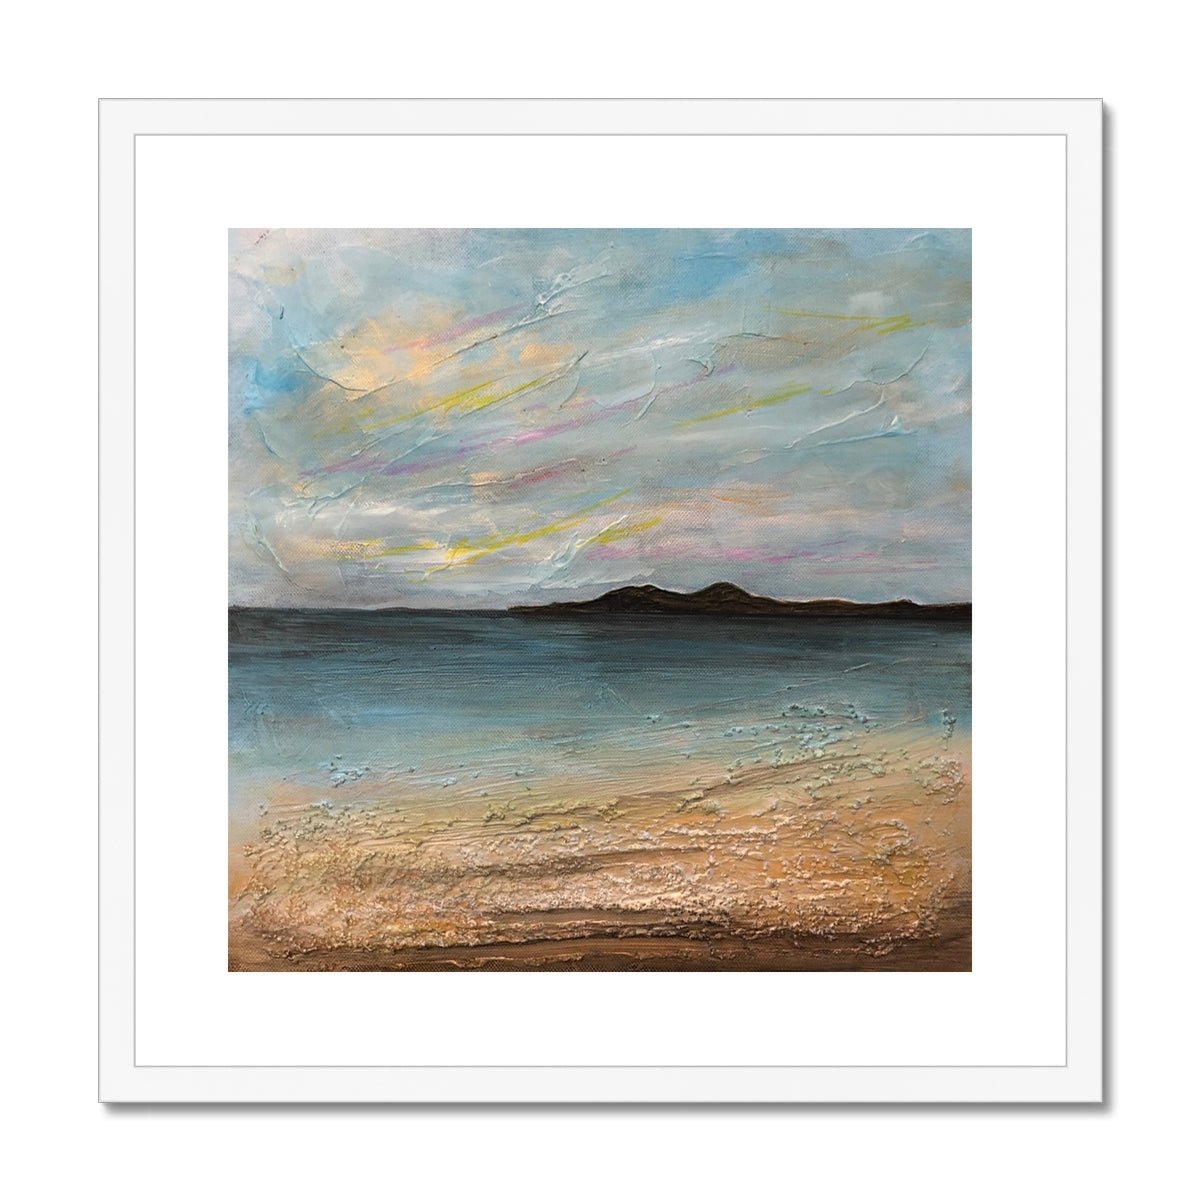 Garrynamonie Beach South Uist Painting | Framed & Mounted Prints From Scotland-Framed & Mounted Prints-Hebridean Islands Art Gallery-20"x20"-White Frame-Paintings, Prints, Homeware, Art Gifts From Scotland By Scottish Artist Kevin Hunter